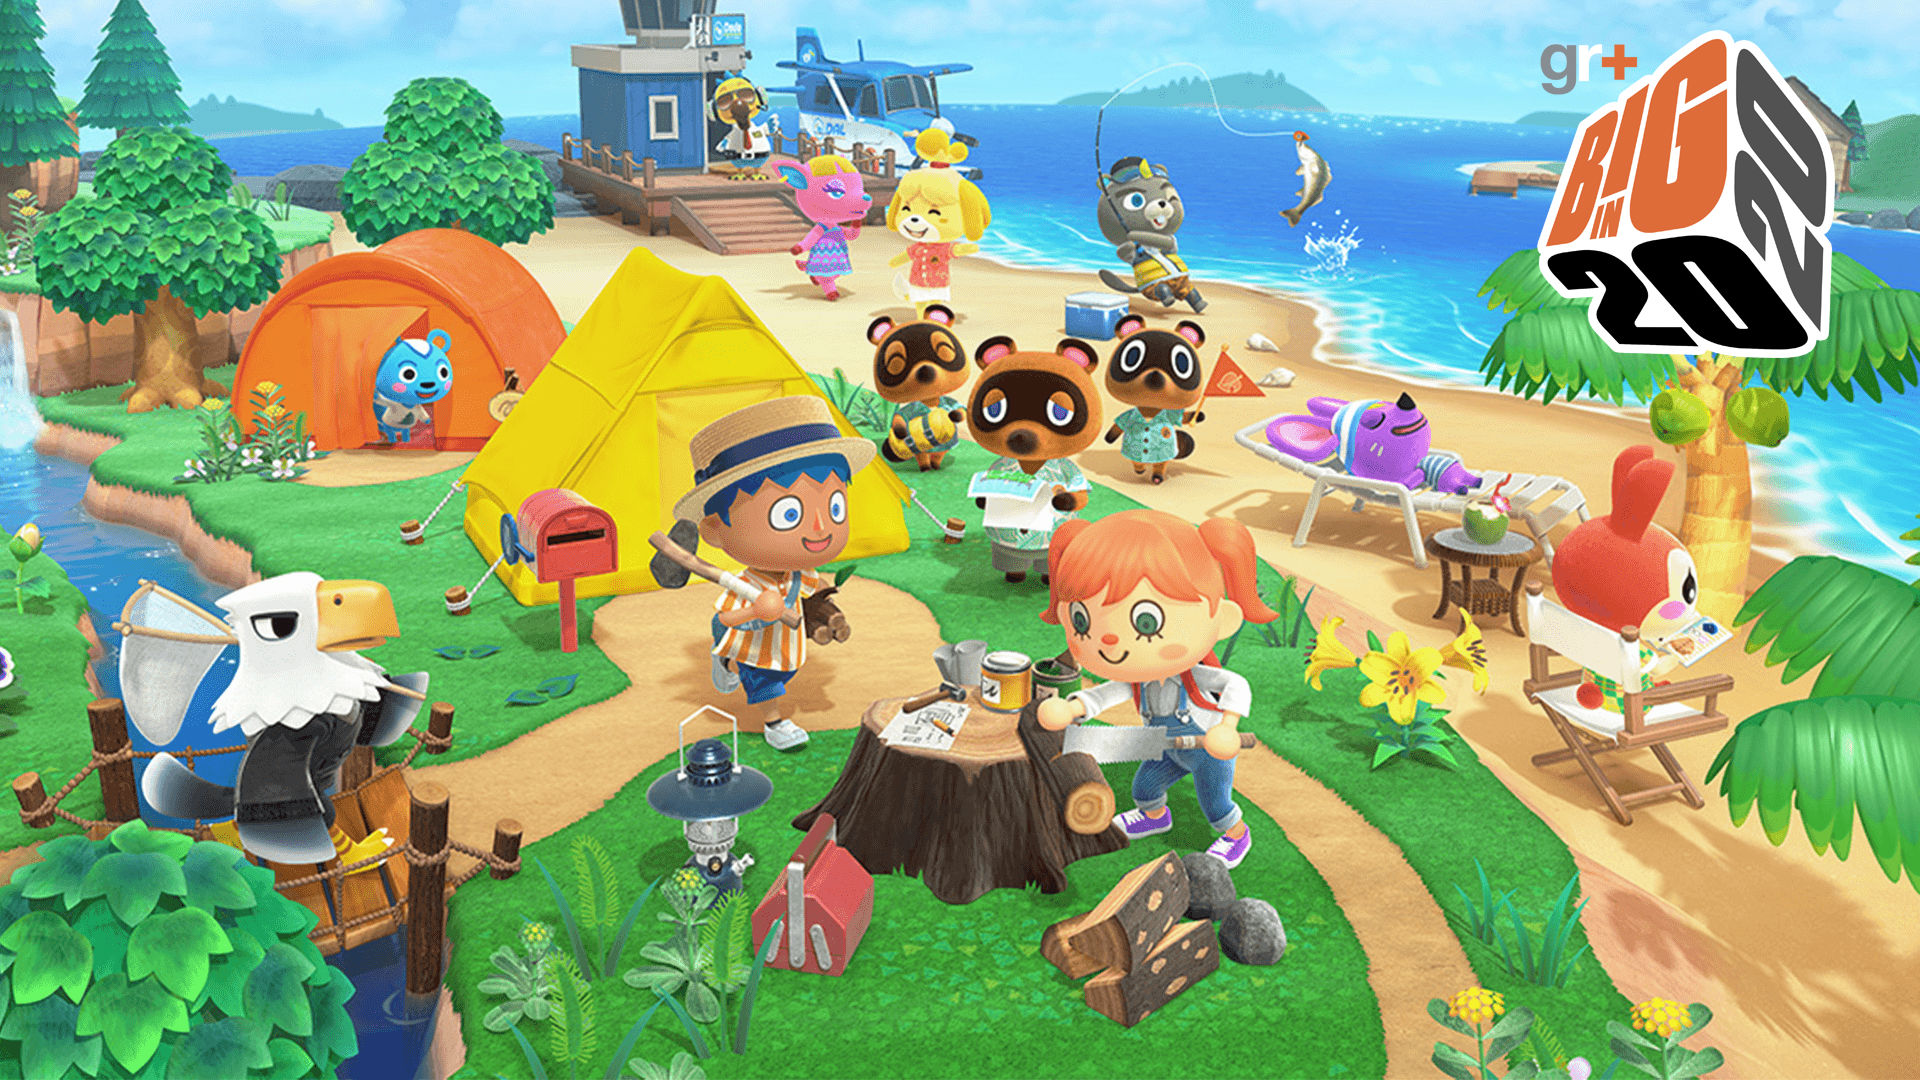 when did animal crossing new horizons come out